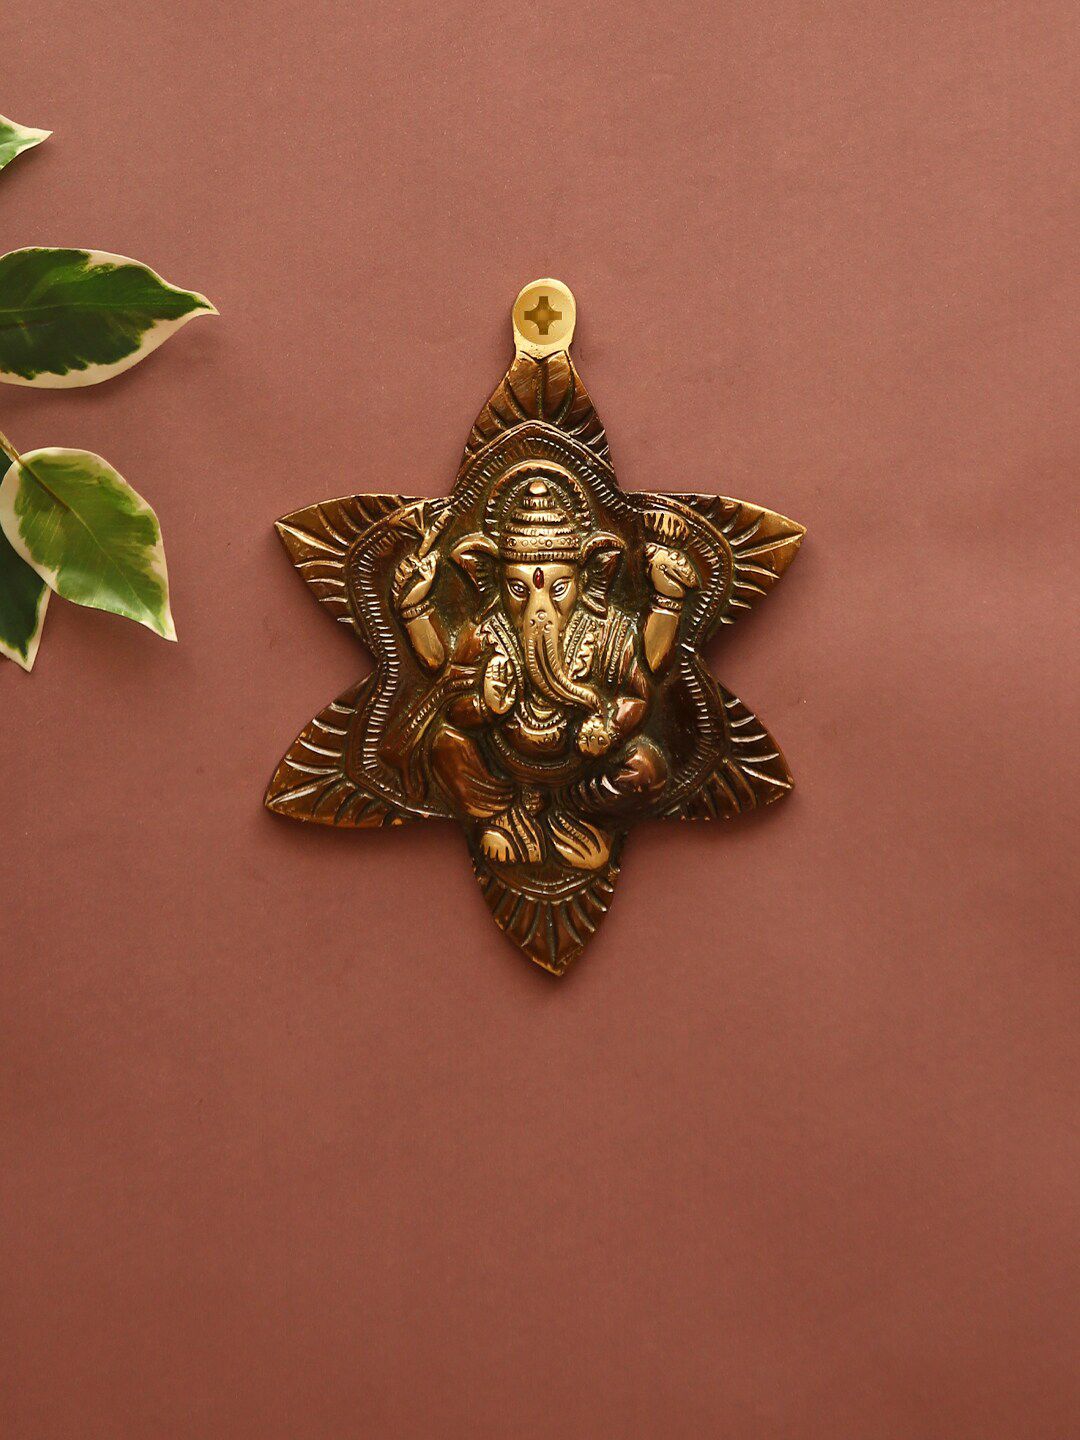 Aapno Rajasthan Brown & Gold-Toned Lord Ganesha In Flower Wall Hanging Price in India